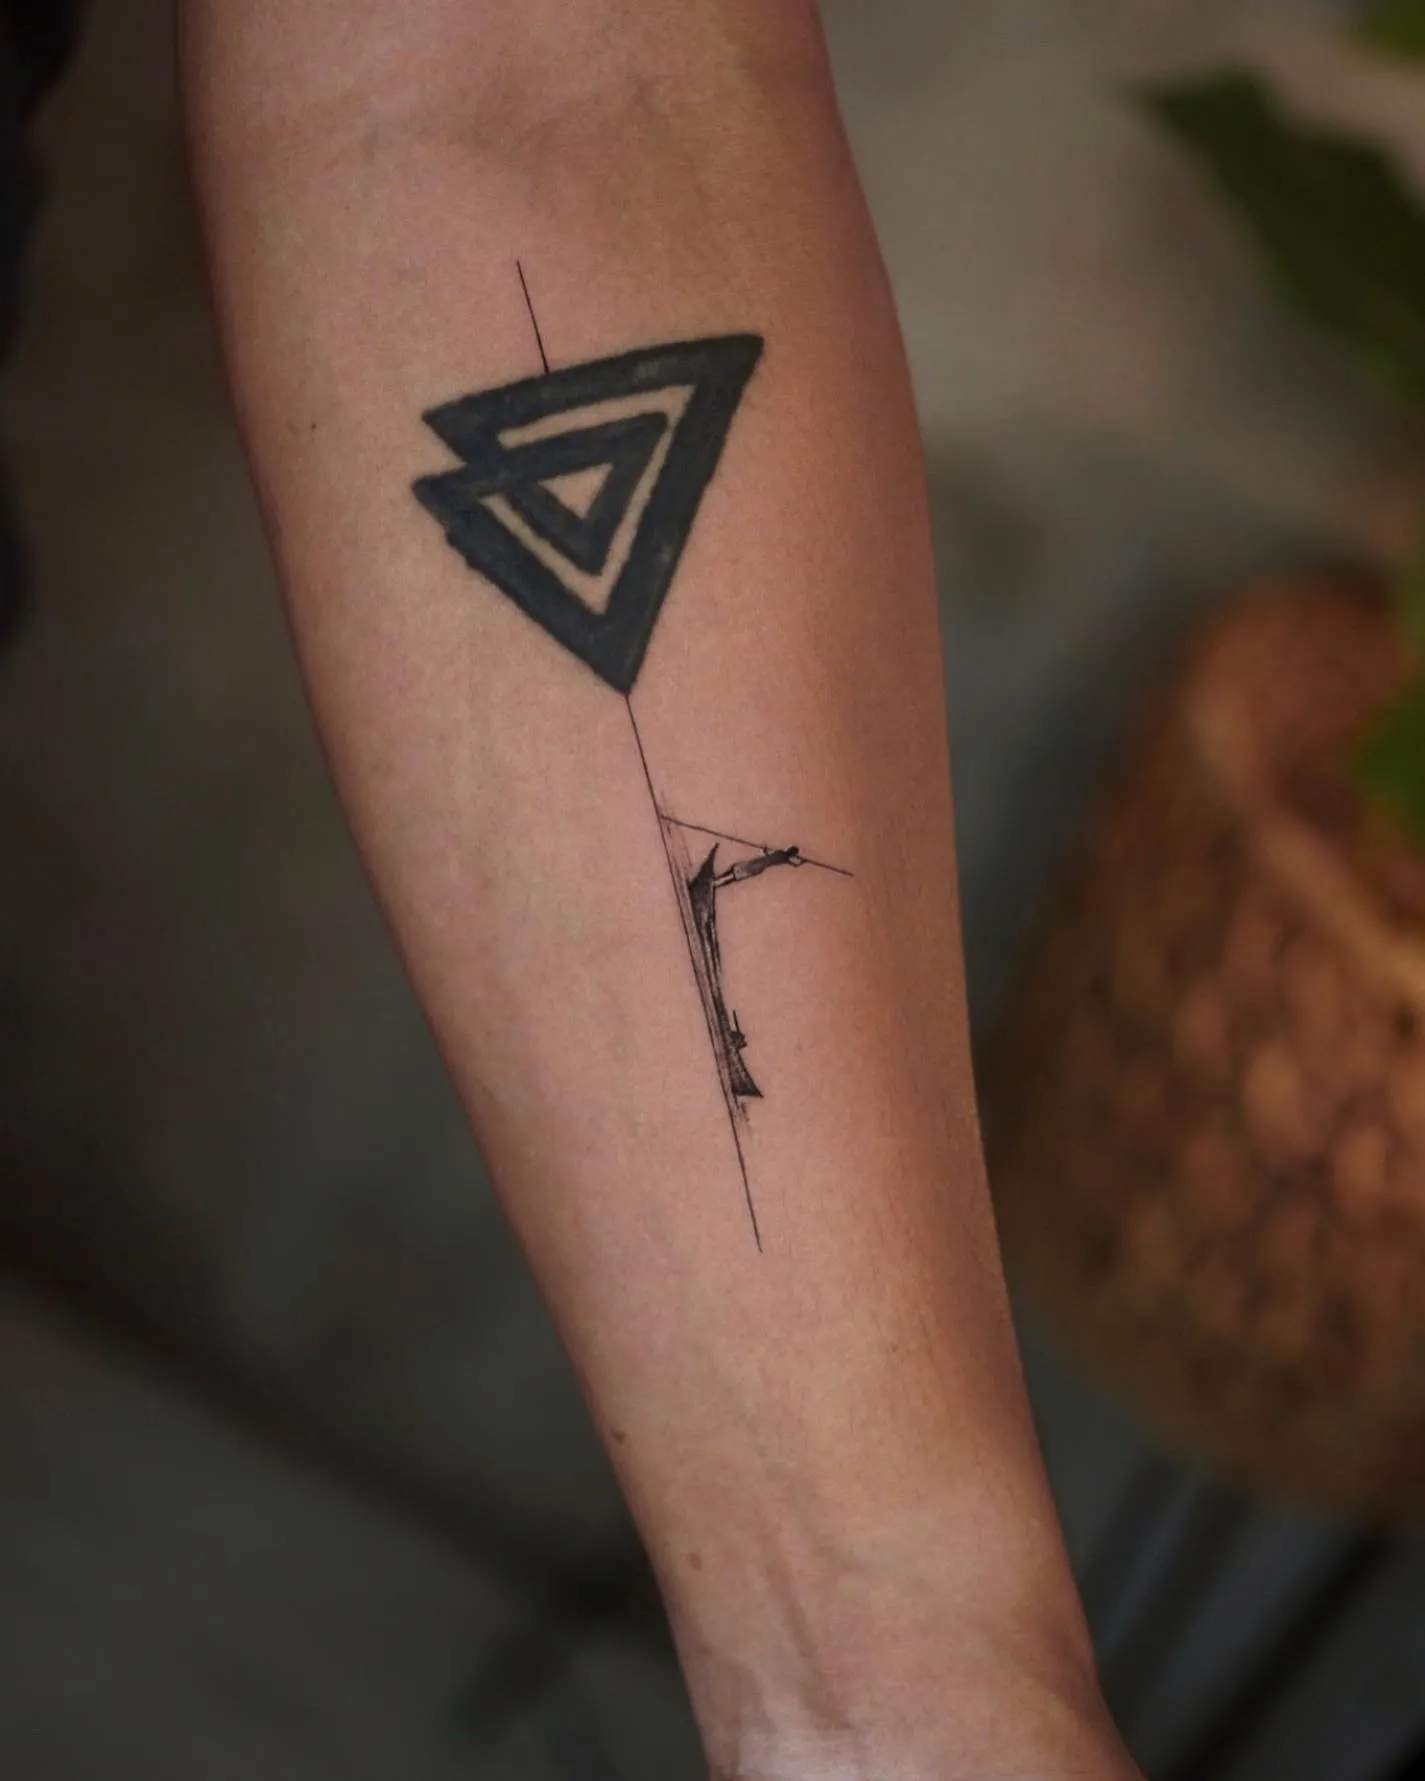 Intricate Double Triangle Tattoo on Forearm